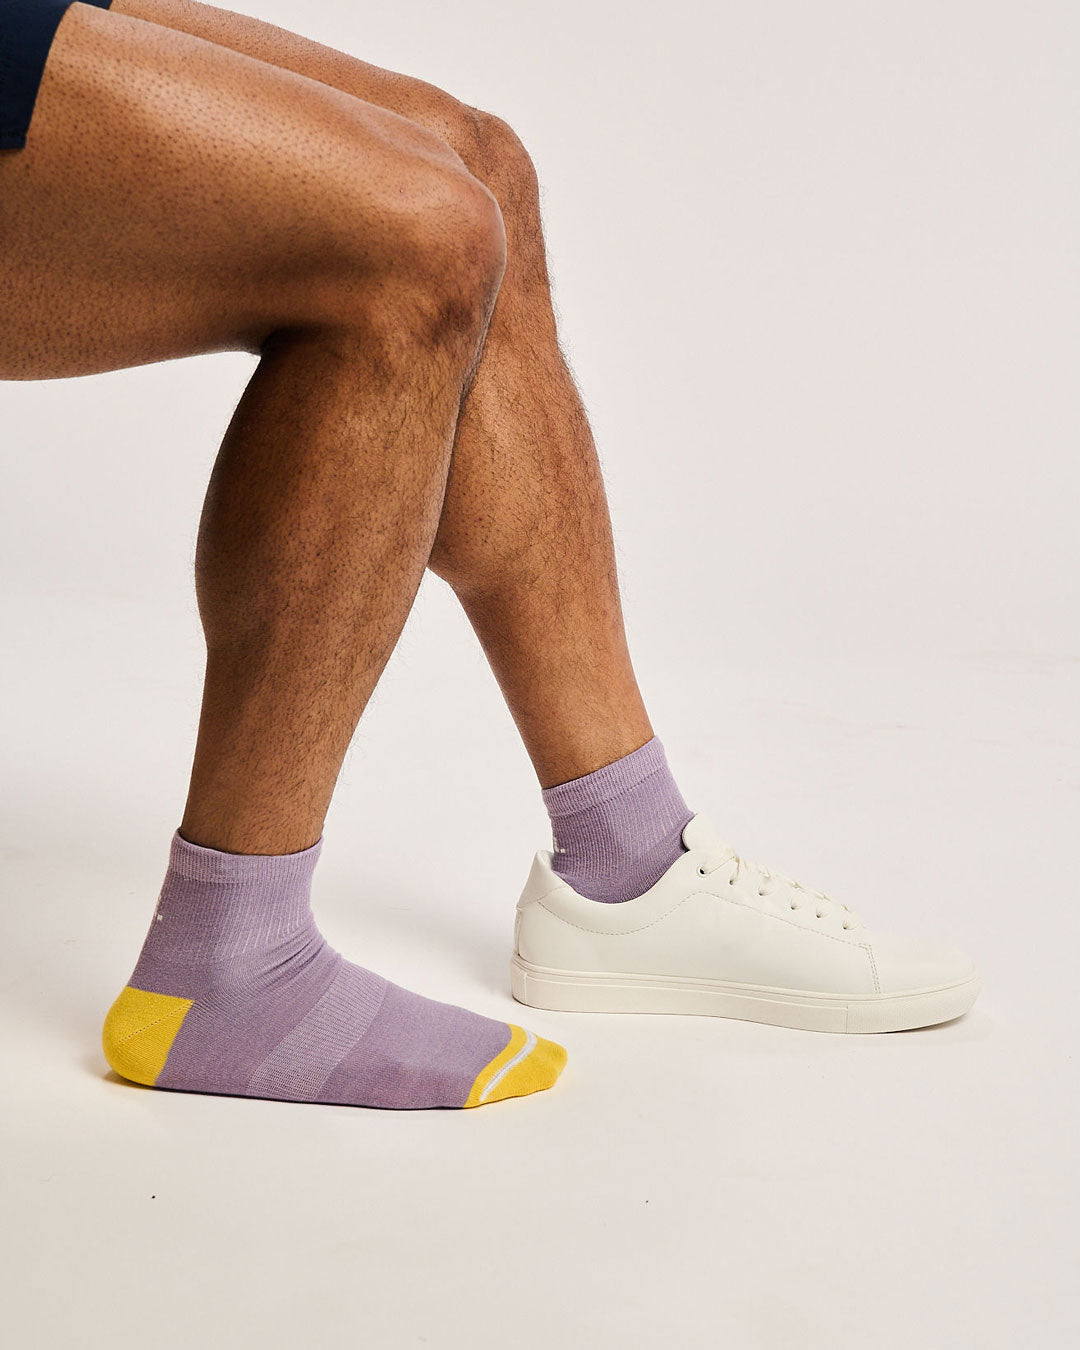 Tennis socks with seamless toe technology and arch support